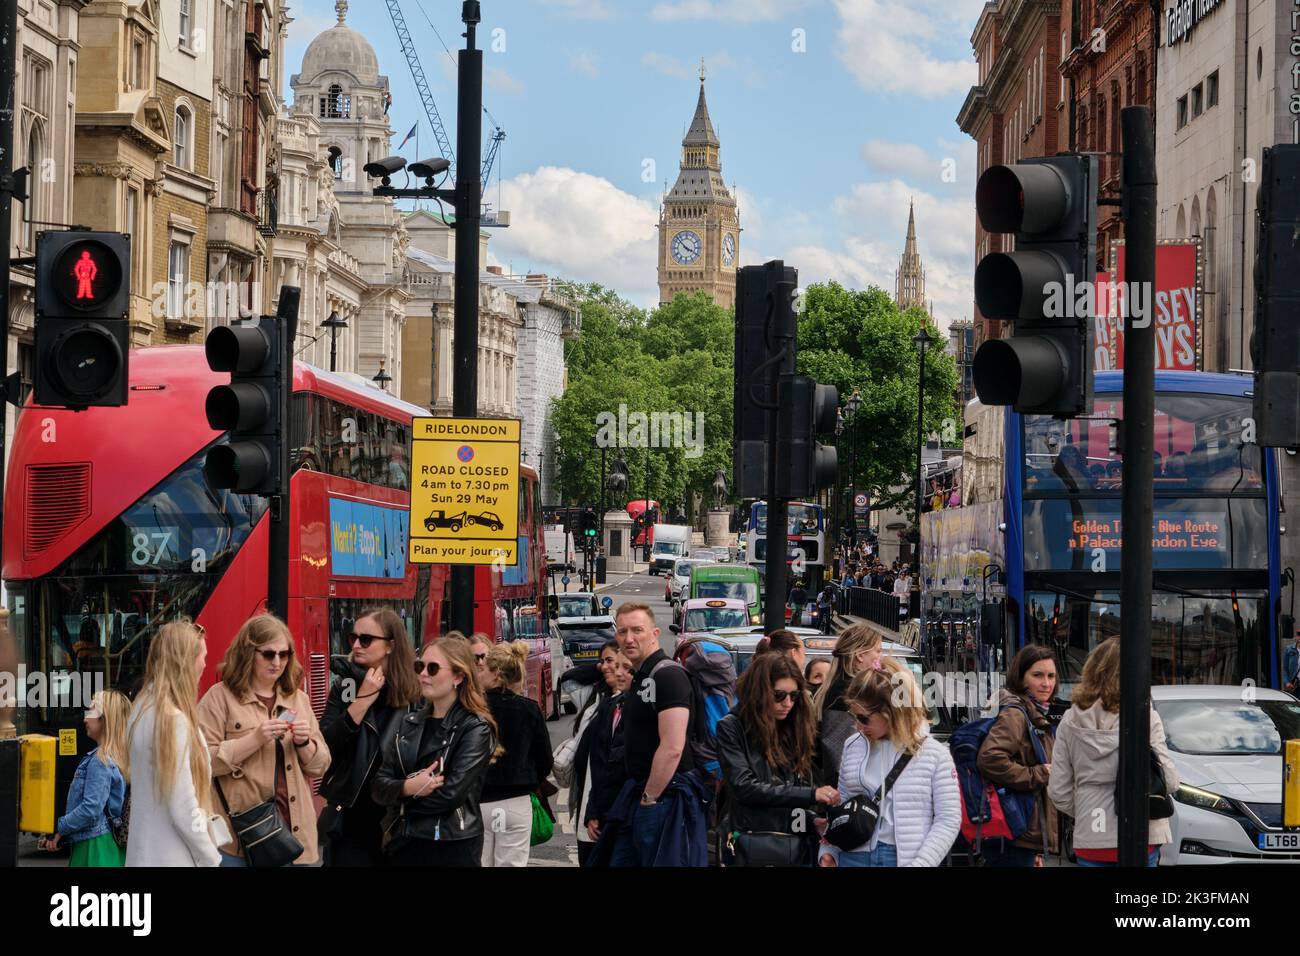 People waiting between the traffic lights near Trafalgar Square, London, with the Big ben and other Victorian buildings in the background. London life. Stock Photo